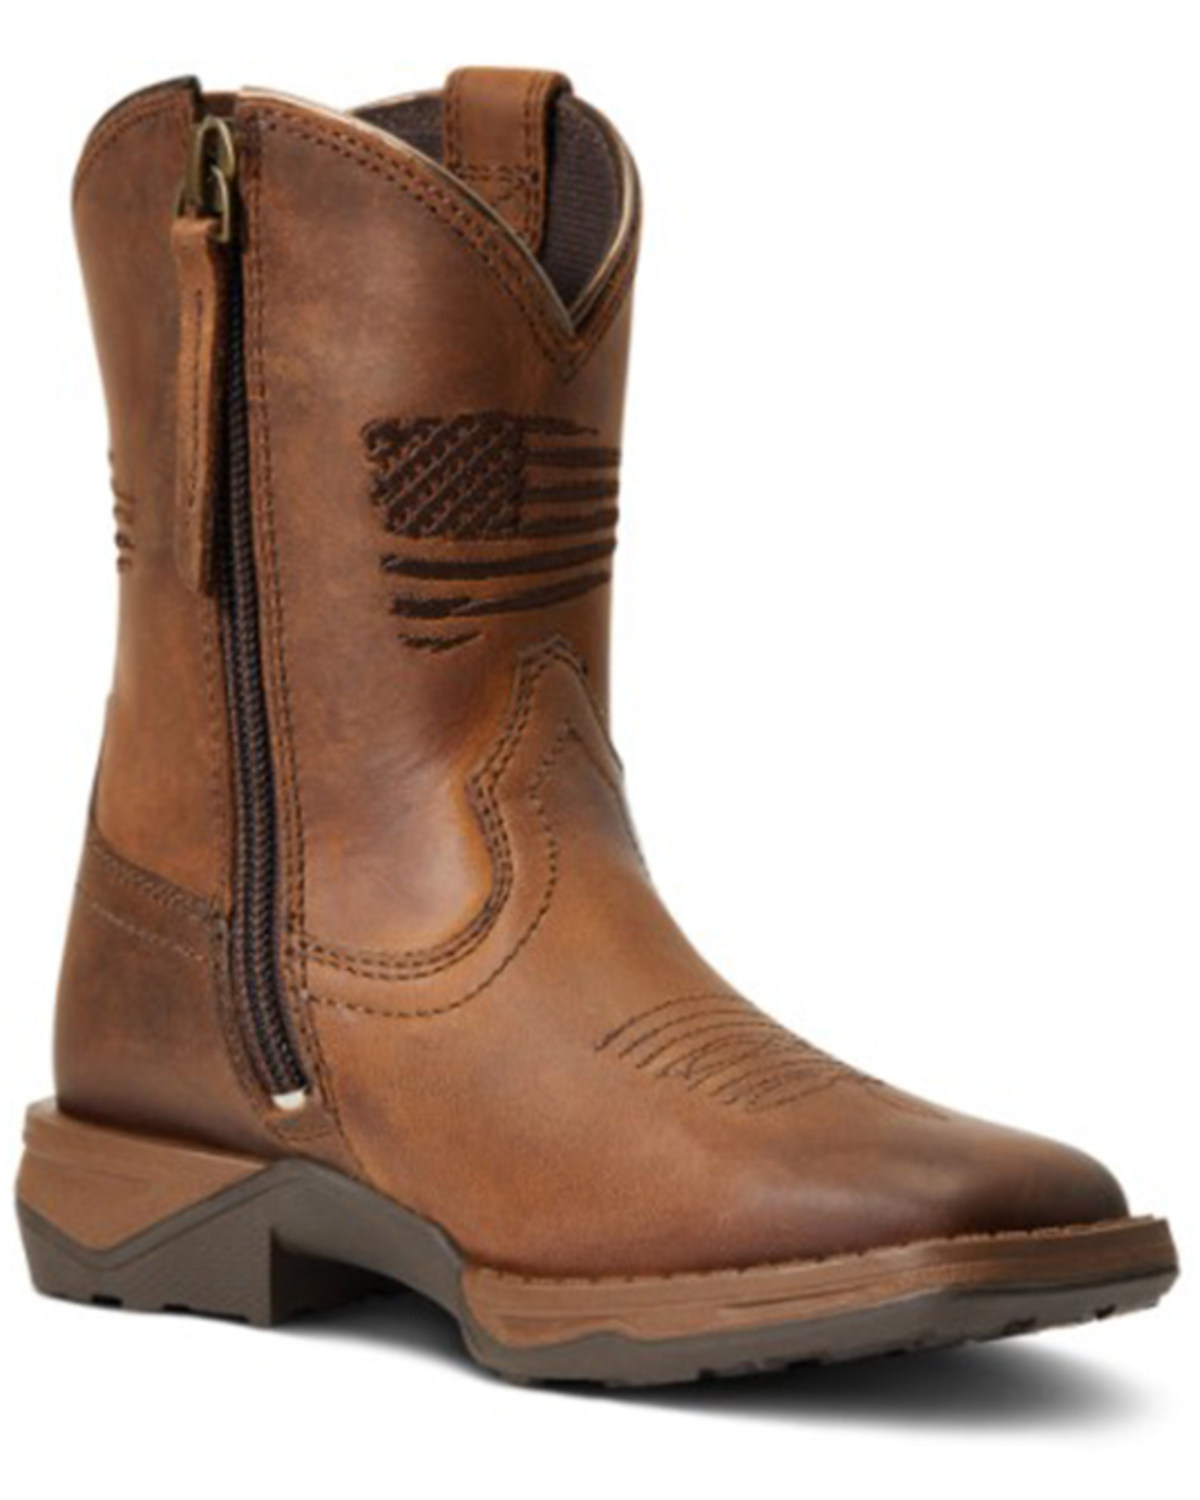 Ariat Boys' Anthem Patriot Easy Fit Distressed Brown Full-Grain Western Boot - Square Toe